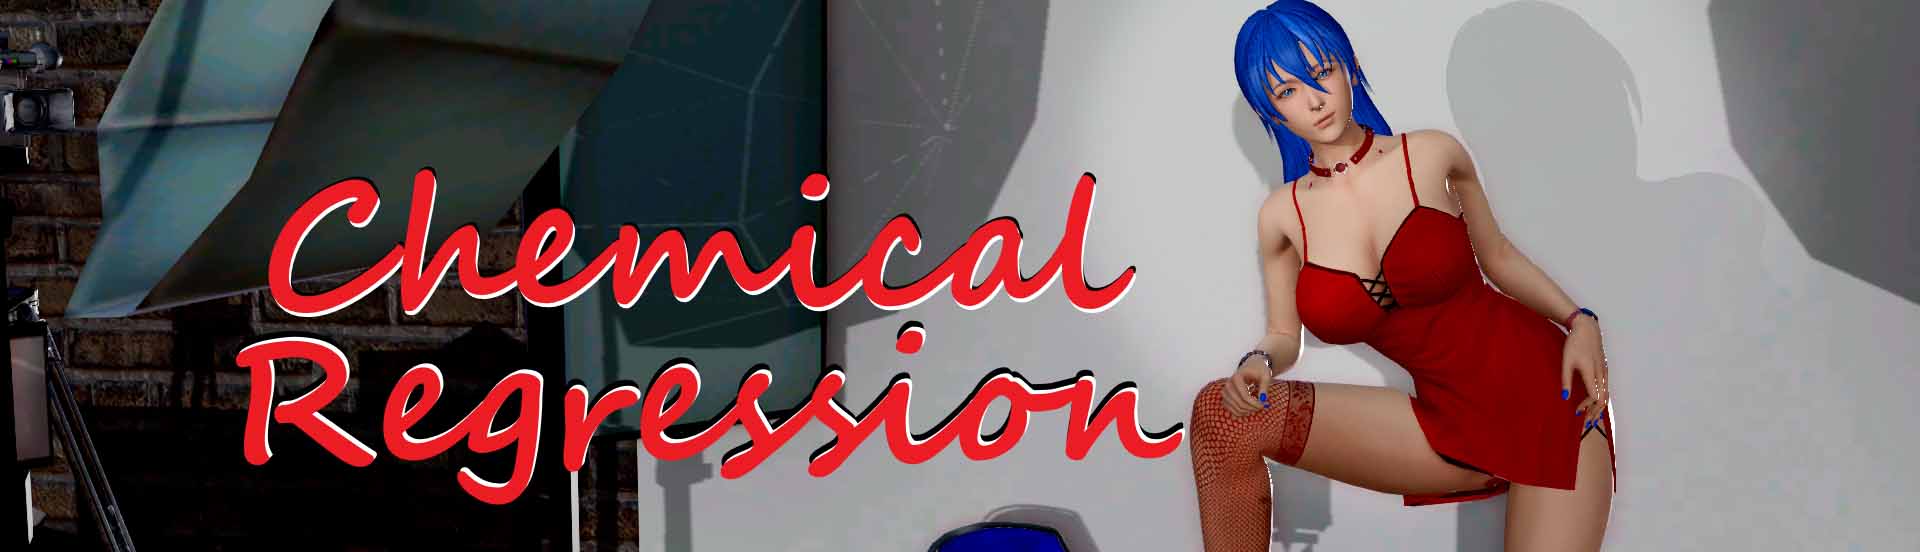 Chemical Regression Apk Android Adult Mobile Game Download (11)